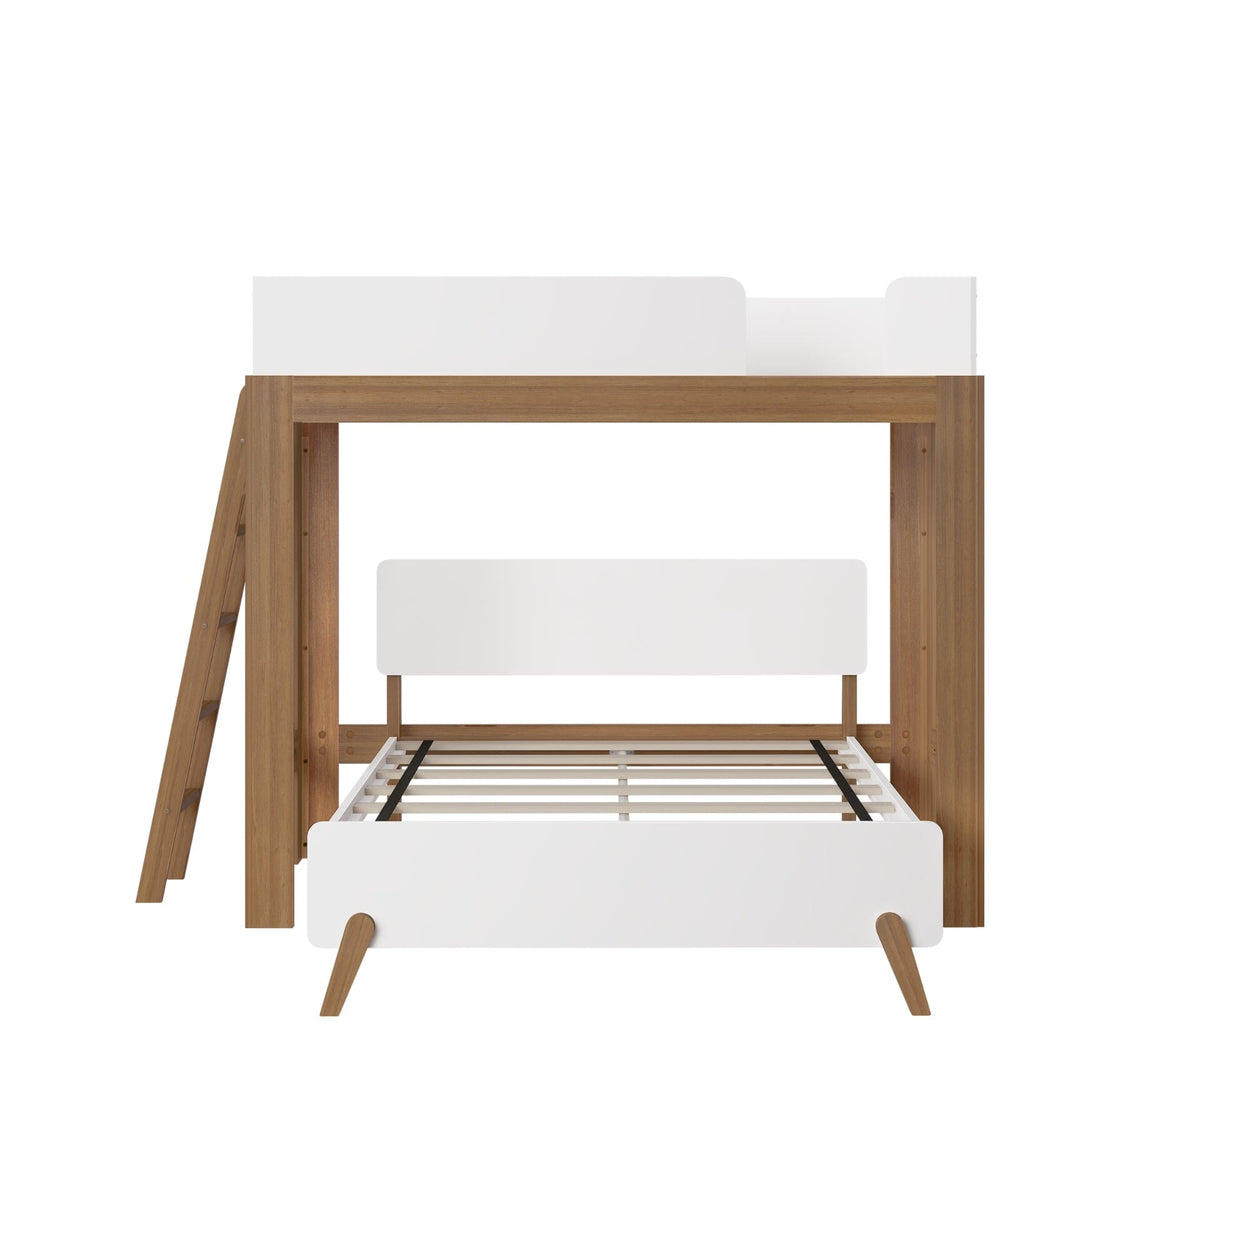 20-812-527 : Bunk Beds Mid-Century Modern L-Shaped Twin over Full Bunk Bed with Ladder on End, Pecan and White